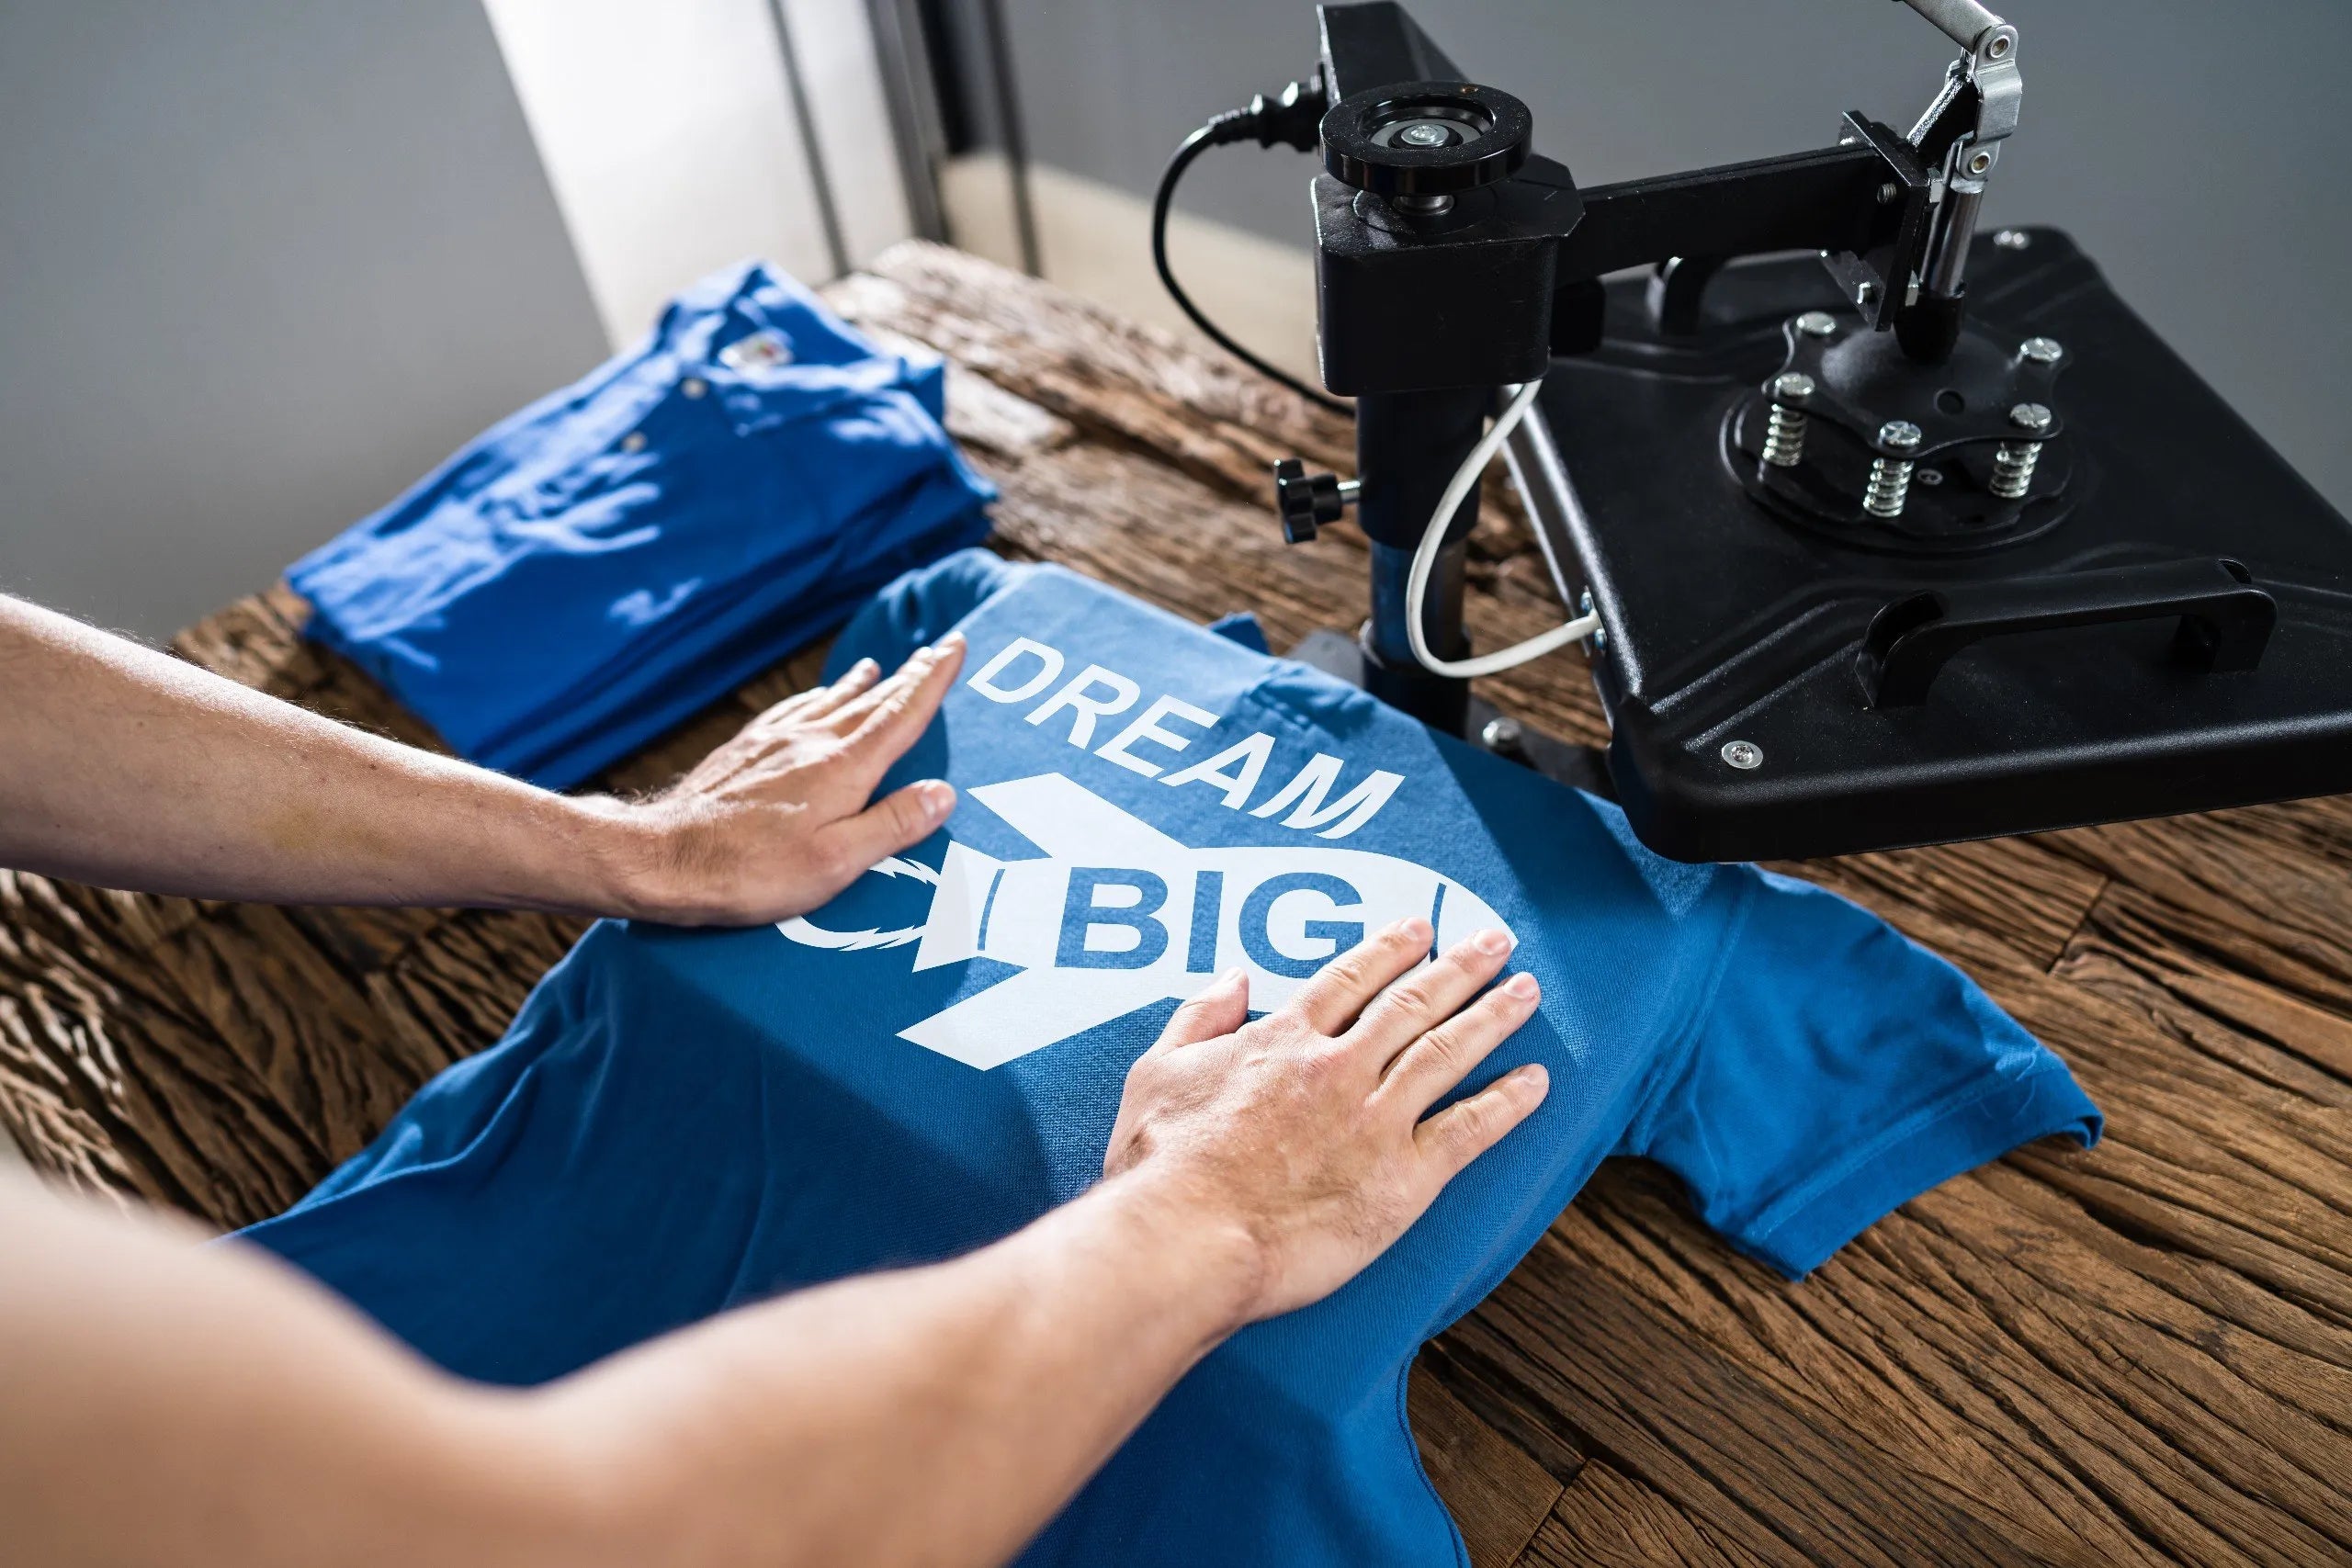 Convey unique messages or offer personalized prints on your POD t-shirts. Source: Shutterstock.